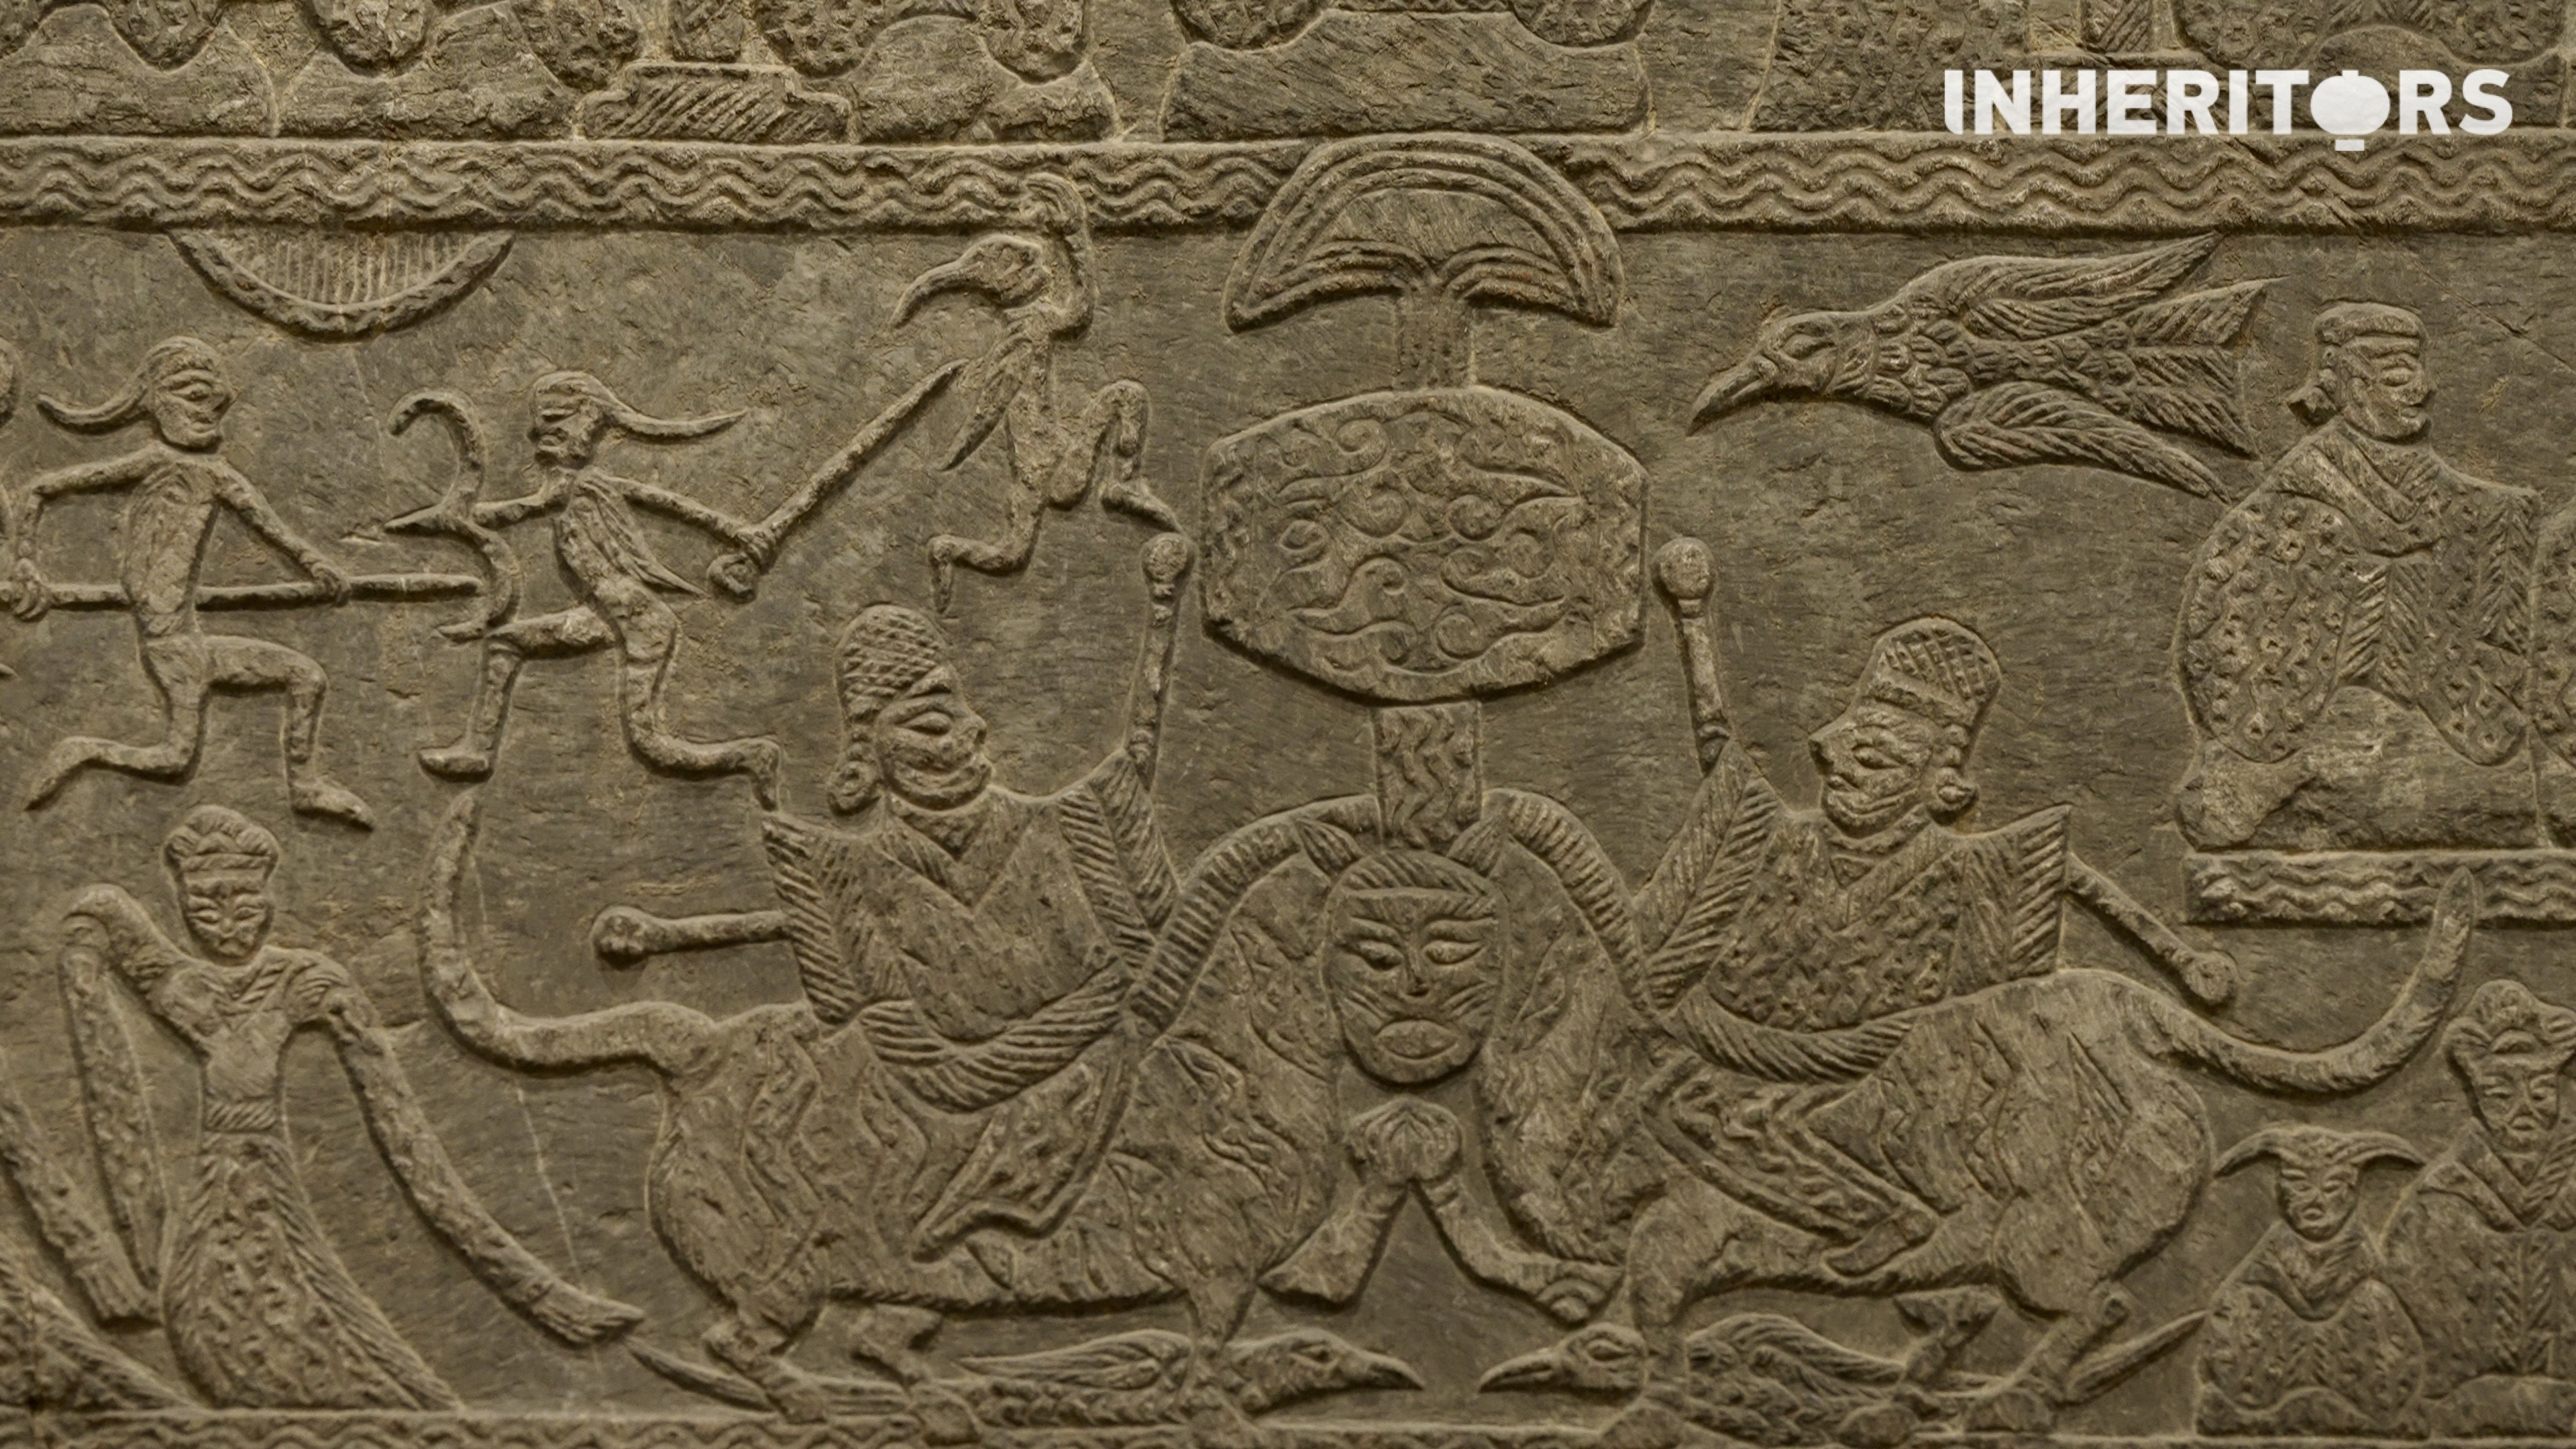 A view of the stone reliefs and rubbings housed at the Luoyang Han Dynasty Art Museum in central China's Henan Province /CGTN